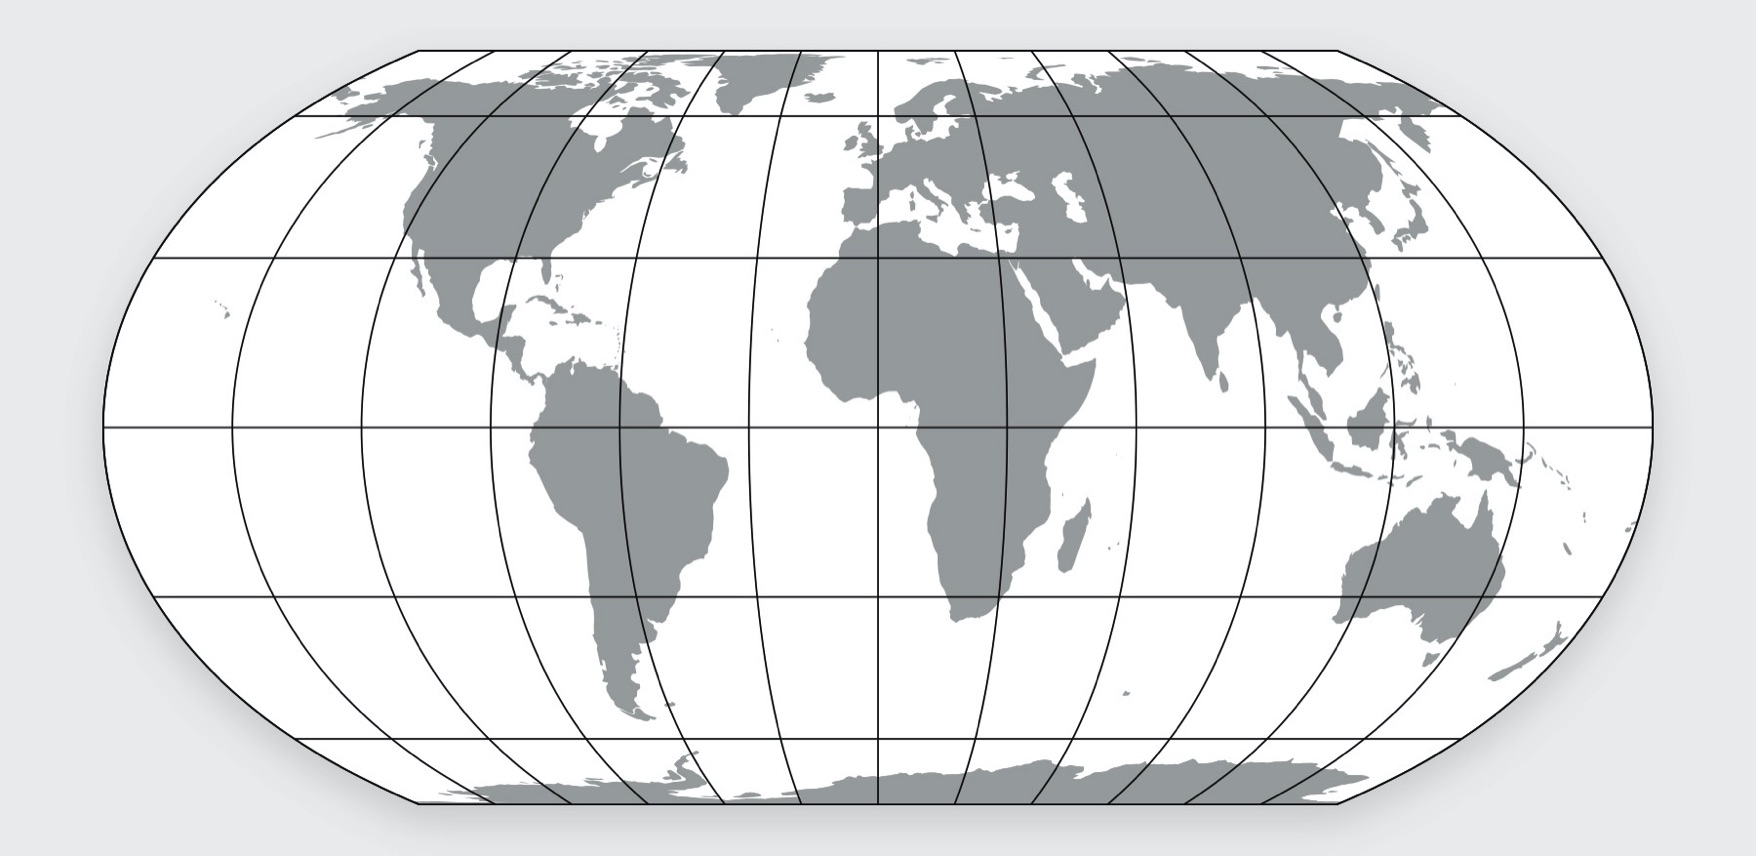 The Equal Earth Projection